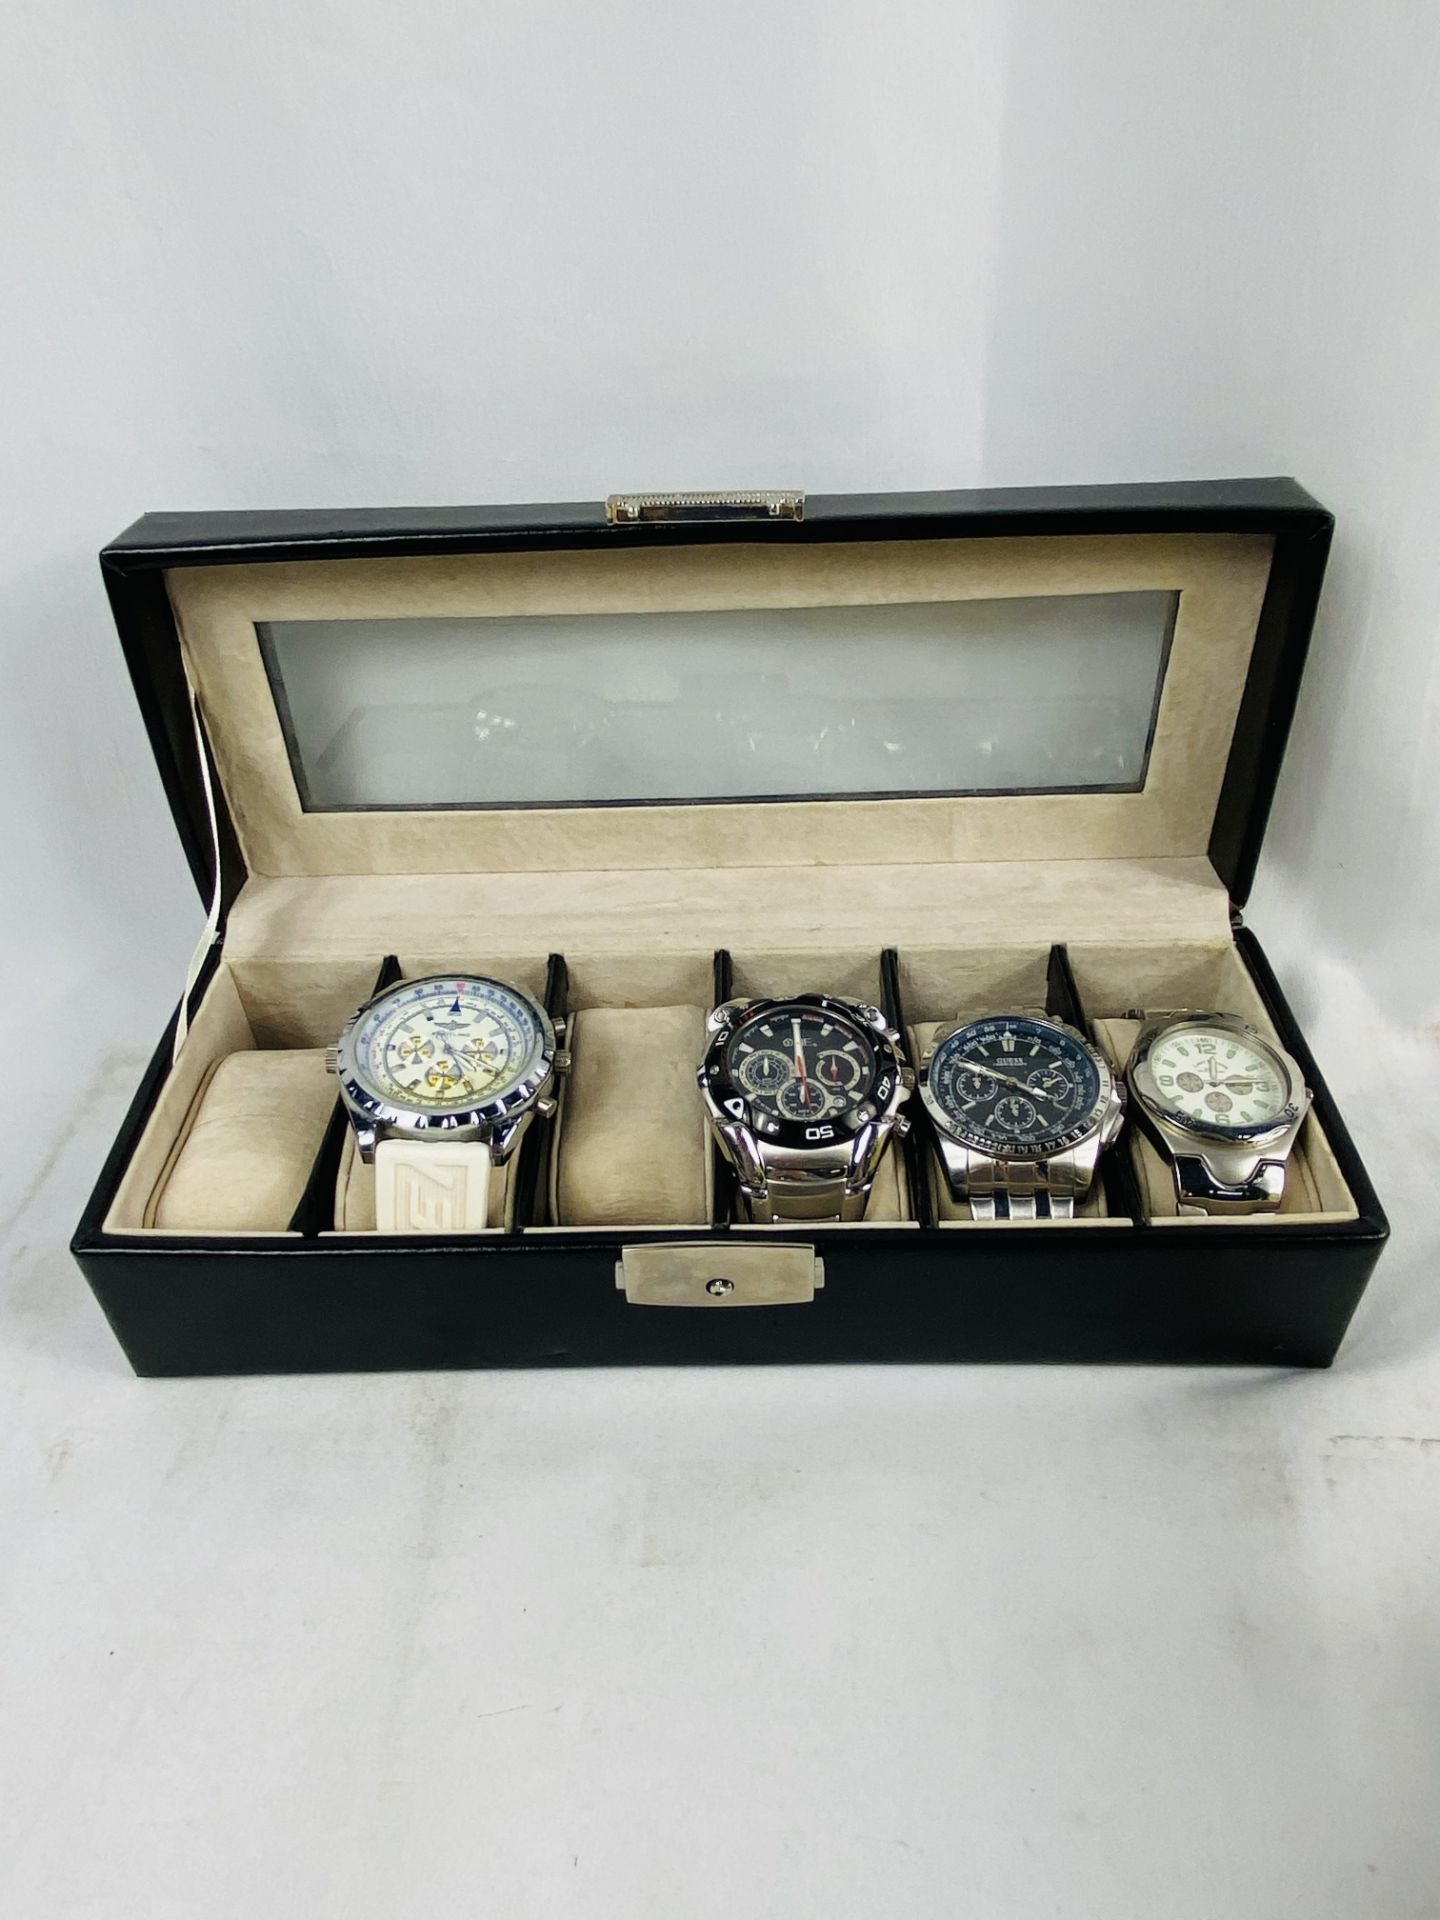 Casio G Shock watch together with six other watches - Image 2 of 6